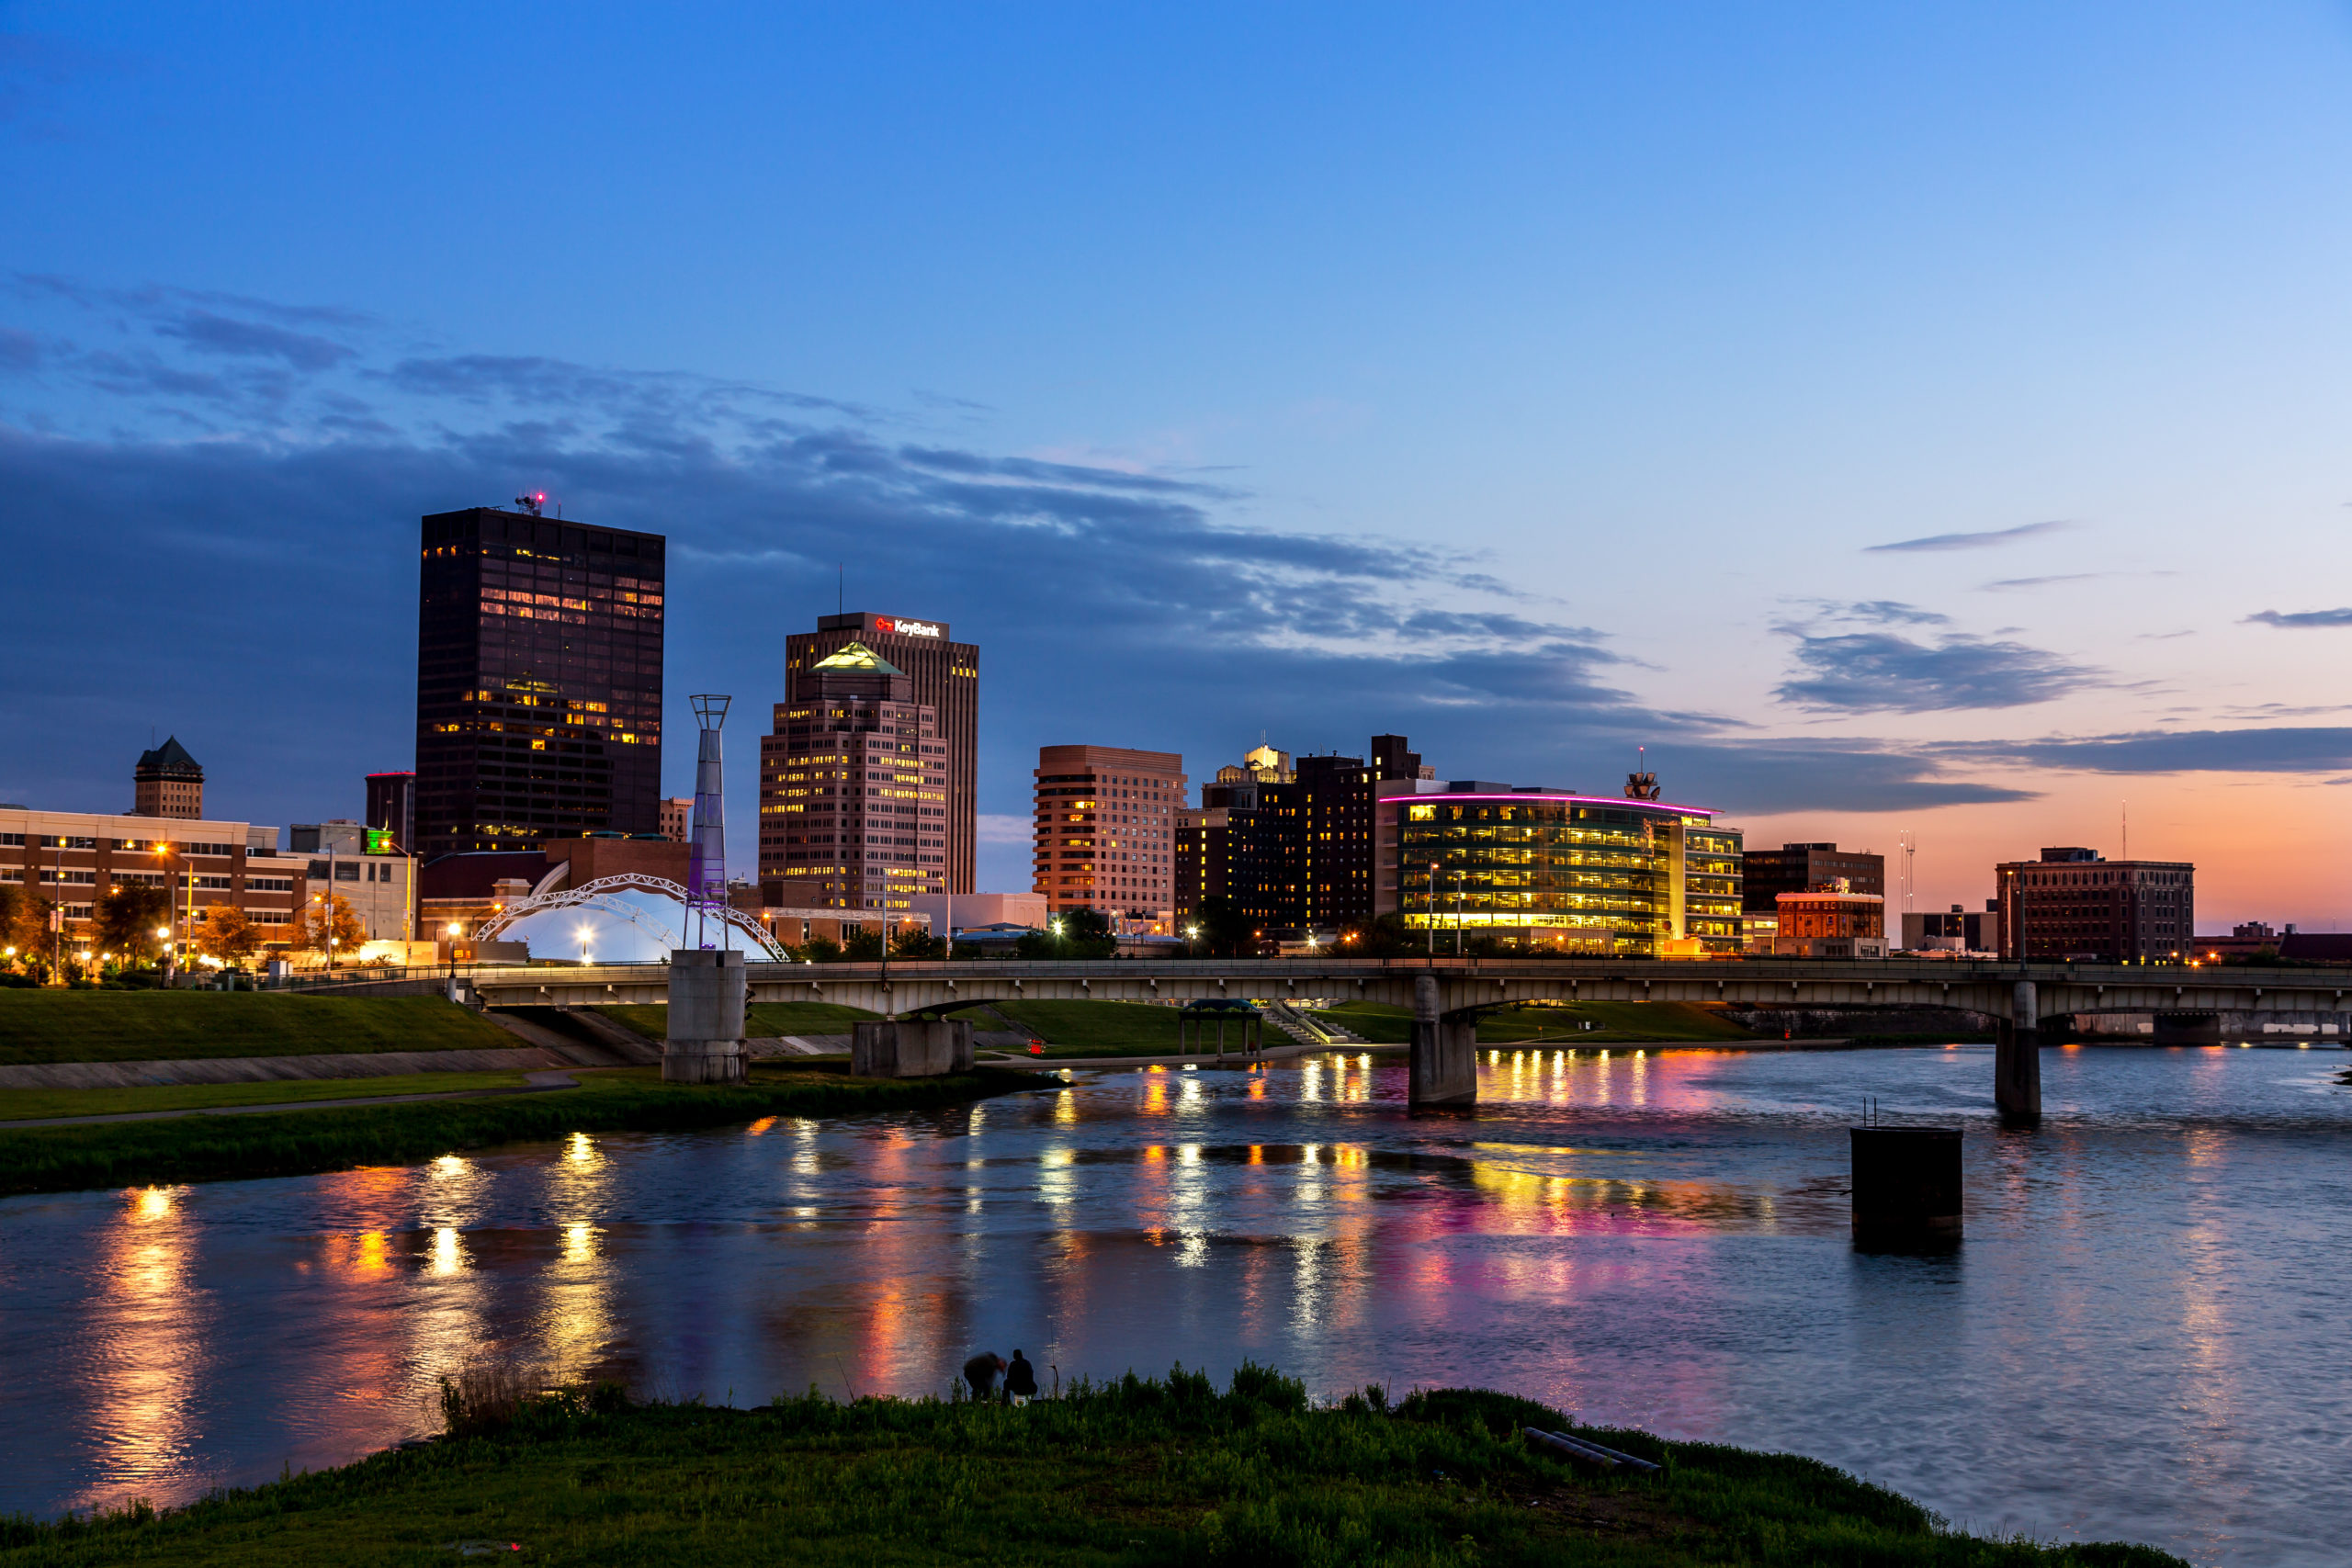 RiverScape view of Dayton, Ohio's skyline with new, exclusive Water